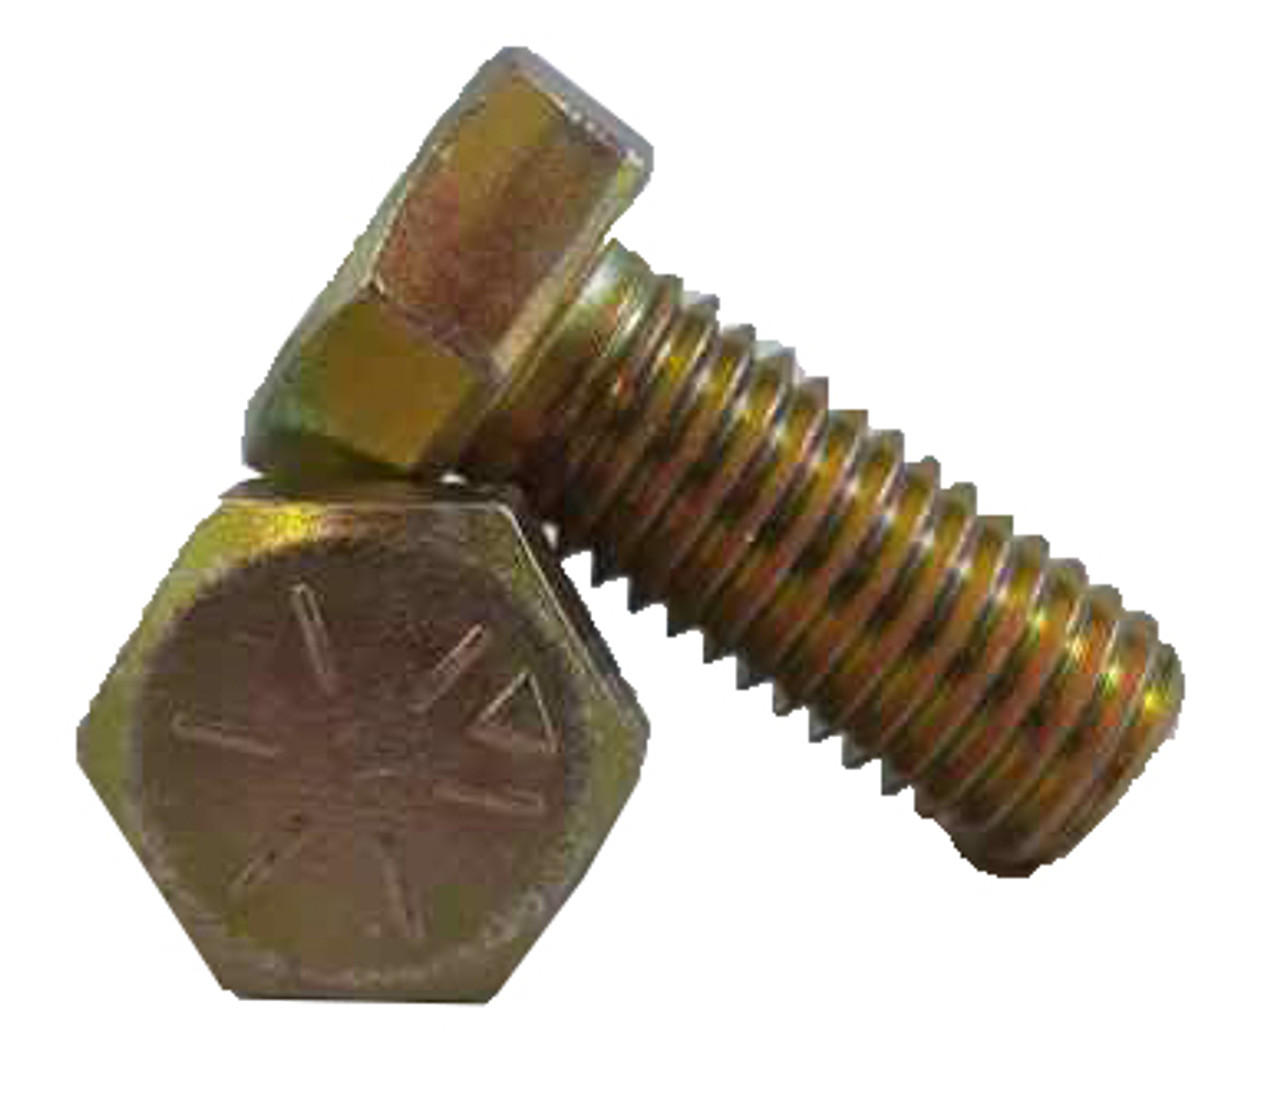 Made in US Hex Head 5/8-18 Threads Steel Hex Bolt Zinc Yellow-Chromate Plated Finish External Hex Drive Partially Threaded Grade 9 2-1/2 Length